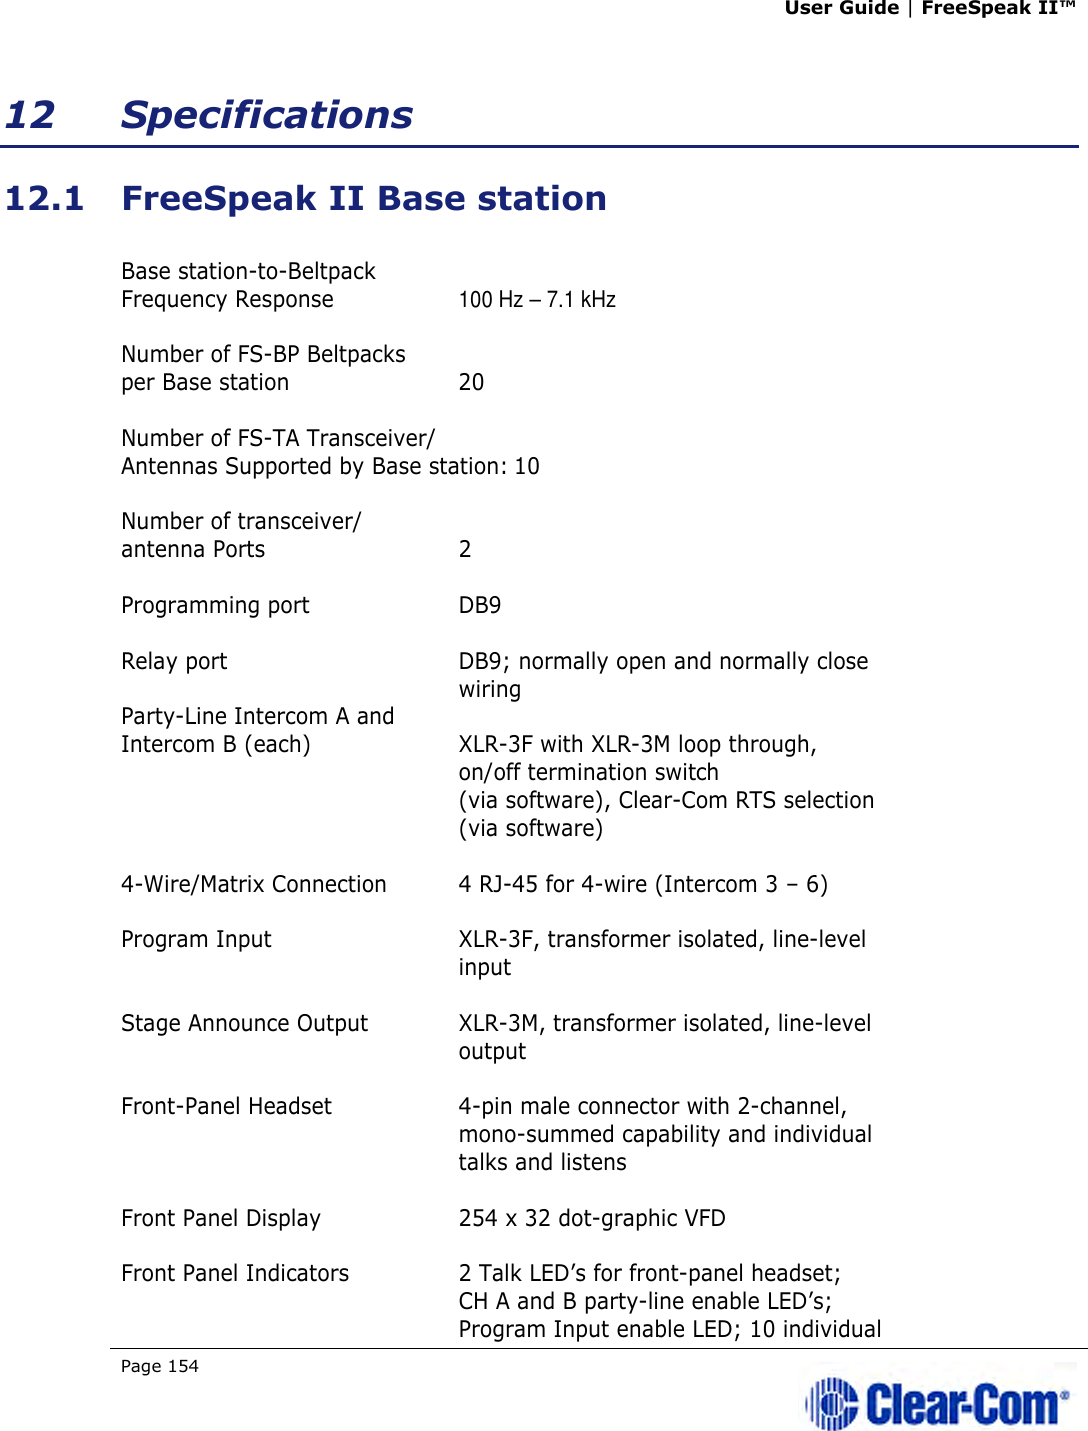 User Guide | FreeSpeak II™  Page 154   12 Specifications 12.1 FreeSpeak II Base station  Base station-to-Beltpack  Frequency Response  100 Hz – 7.1 kHz  Number of FS-BP Beltpacks  per Base station  20  Number of FS-TA Transceiver/ Antennas Supported by Base station: 10  Number of transceiver/ antenna Ports  2  Programming port  DB9  Relay port  DB9; normally open and normally close    wiring Party-Line Intercom A and  Intercom B (each)  XLR-3F with XLR-3M loop through,   on/off termination switch    (via software), Clear-Com RTS selection    (via software)   4-Wire/Matrix Connection  4 RJ-45 for 4-wire (Intercom 3 – 6)  Program Input  XLR-3F, transformer isolated, line-level   input  Stage Announce Output  XLR-3M, transformer isolated, line-level    output  Front-Panel Headset  4-pin male connector with 2-channel,    mono-summed capability and individual   talks and listens  Front Panel Display  254 x 32 dot-graphic VFD  Front Panel Indicators  2 Talk LED’s for front-panel headset;    CH A and B party-line enable LED’s;    Program Input enable LED; 10 individual  